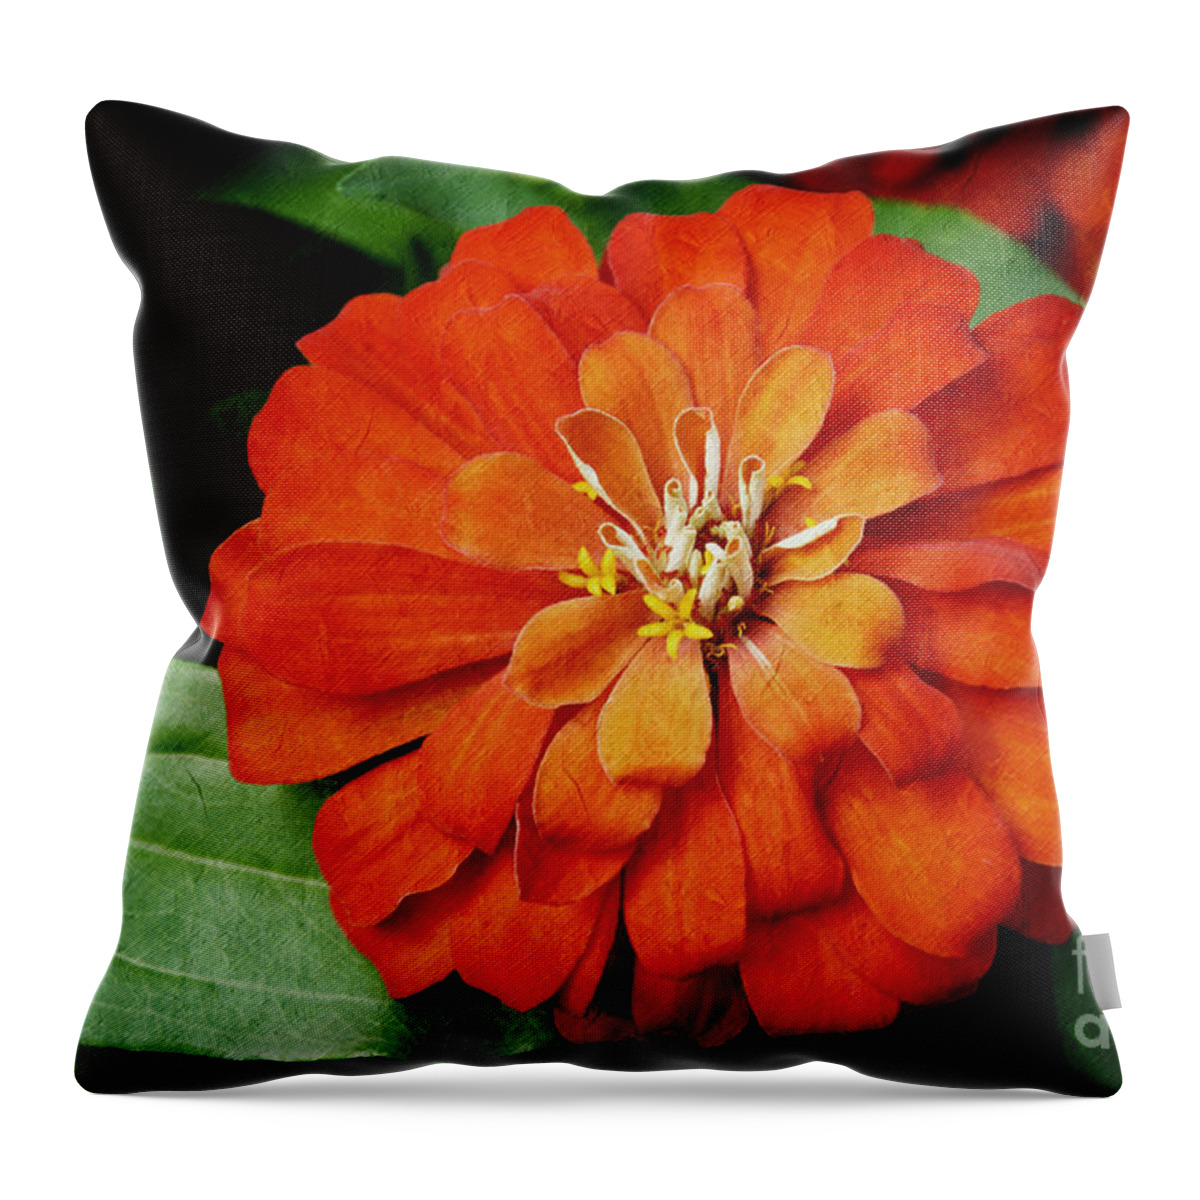 Flower Throw Pillow featuring the photograph Zinnia by Andee Design